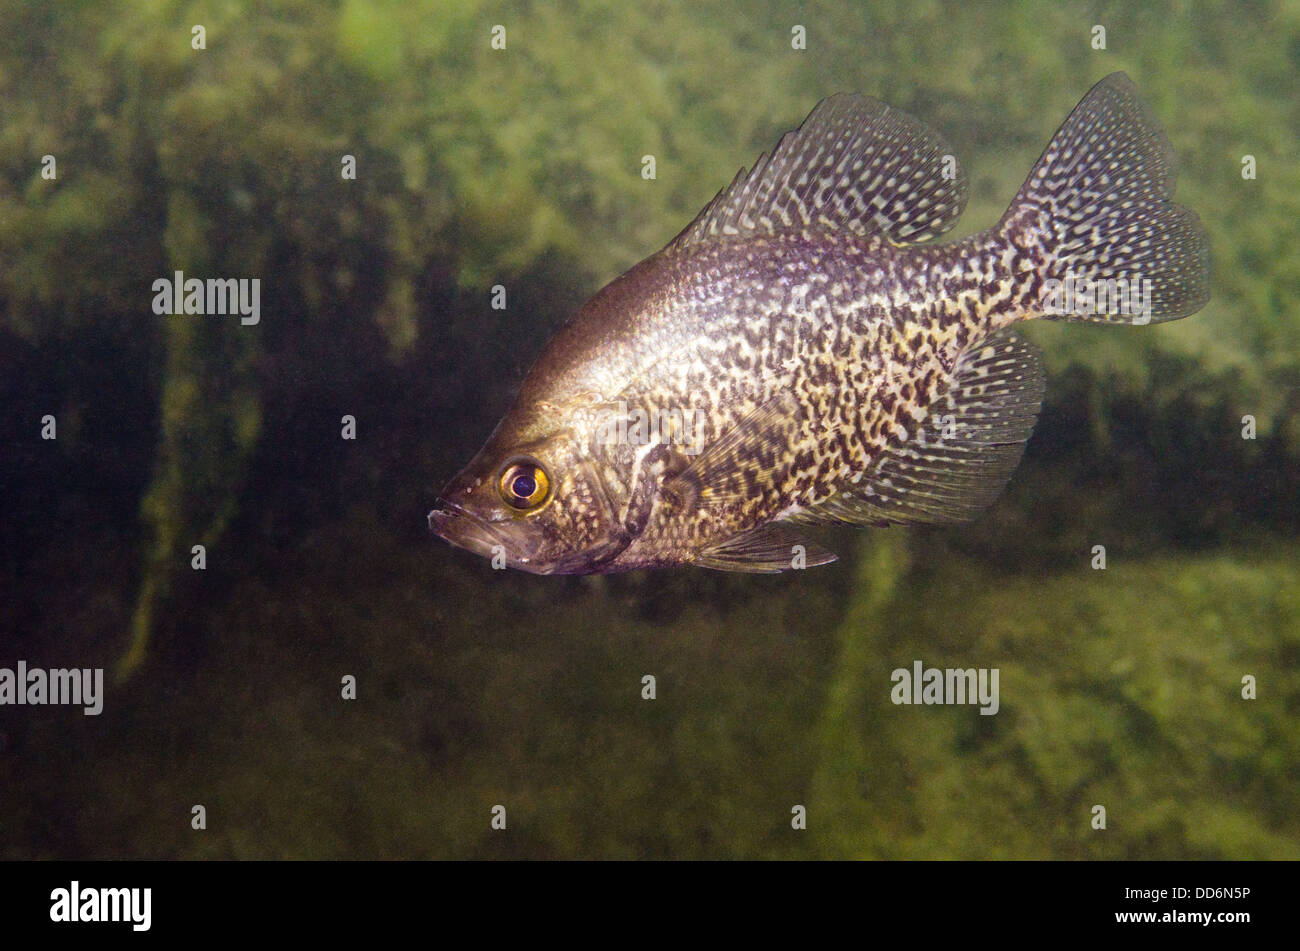 Photograph of a 'Black Crappie' , Pomoxis nigromaculatus, freshwater fish swimming in a abandoned quarry. Stock Photo